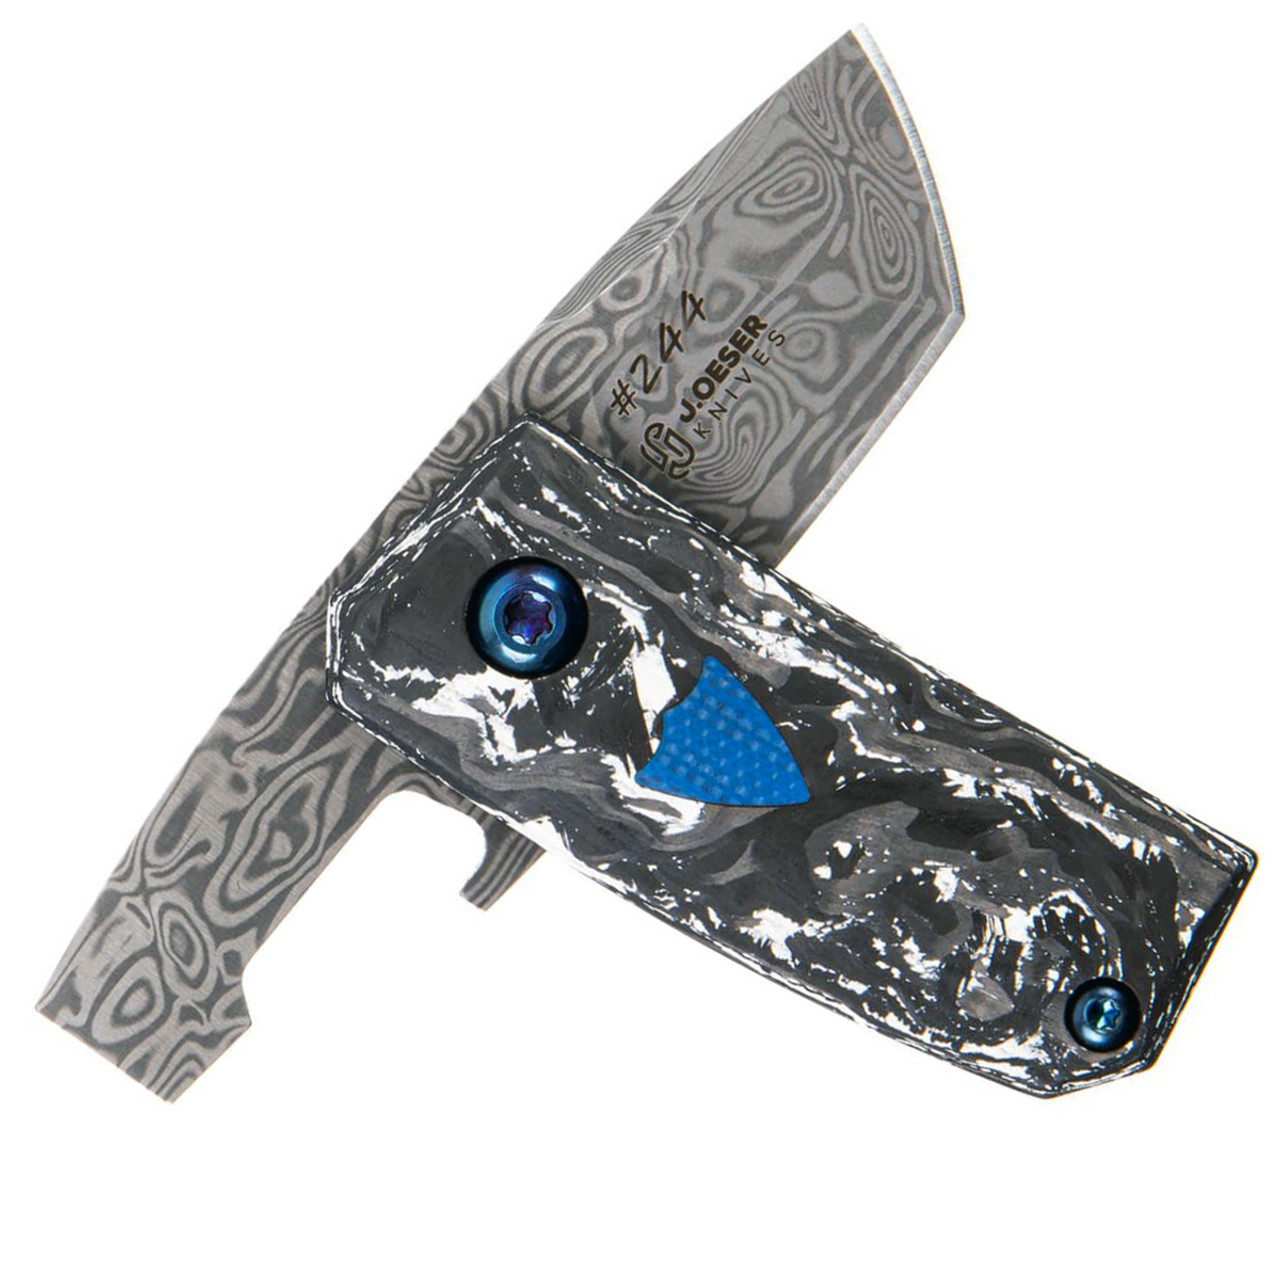 https://cdn11.bigcommerce.com/s-1tyihs272l/images/stencil/1280x1280/products/6245/13963/Benchmade-602-211-Tengu-Tool-Fat-Carbon-Damascus-Gold-Glass-Open__11316.1636741852.jpg?c=2